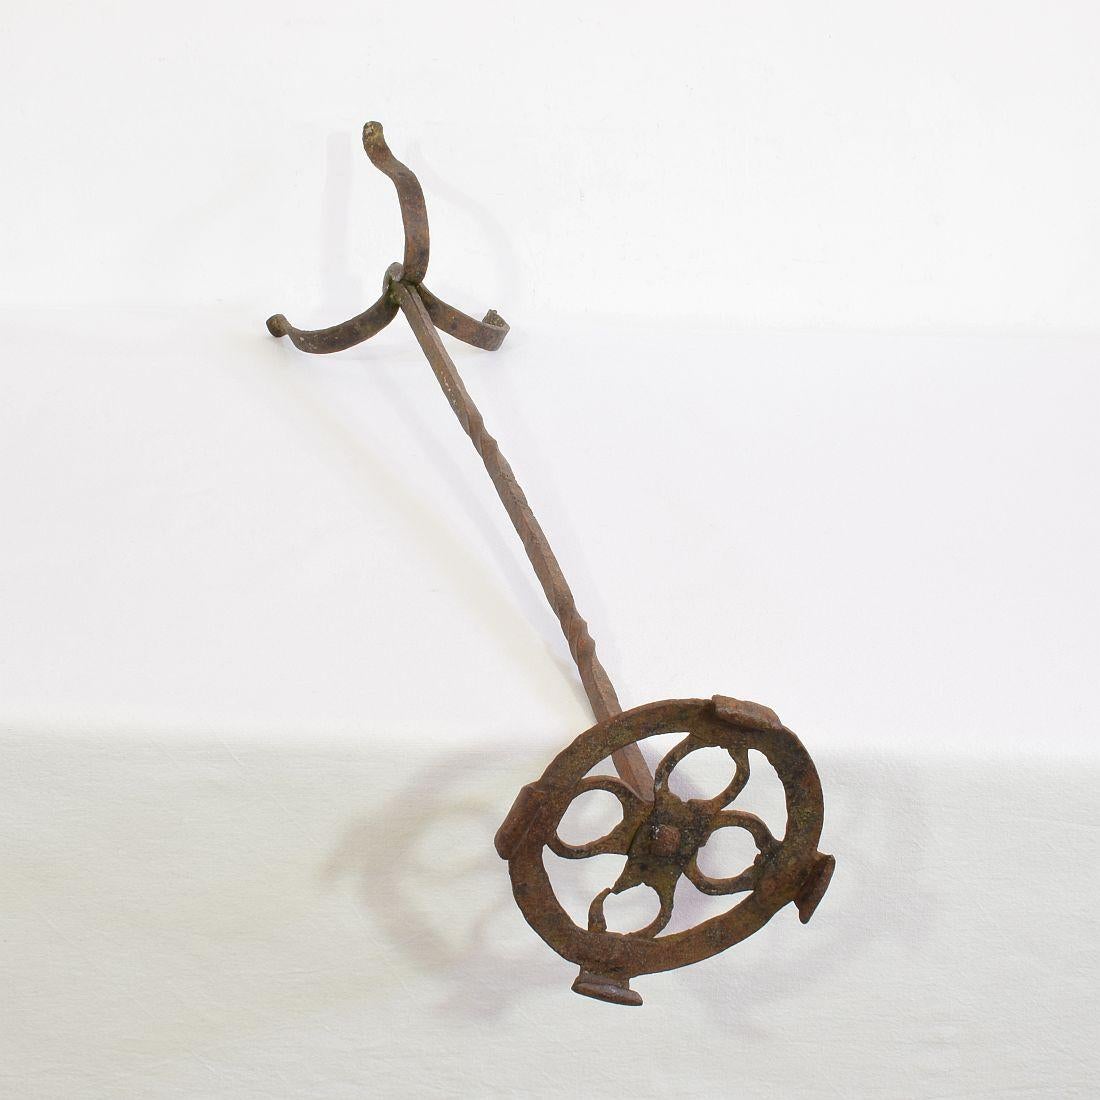 17th-18th Century Spanish Hand Forged Iron Candleholder For Sale 9